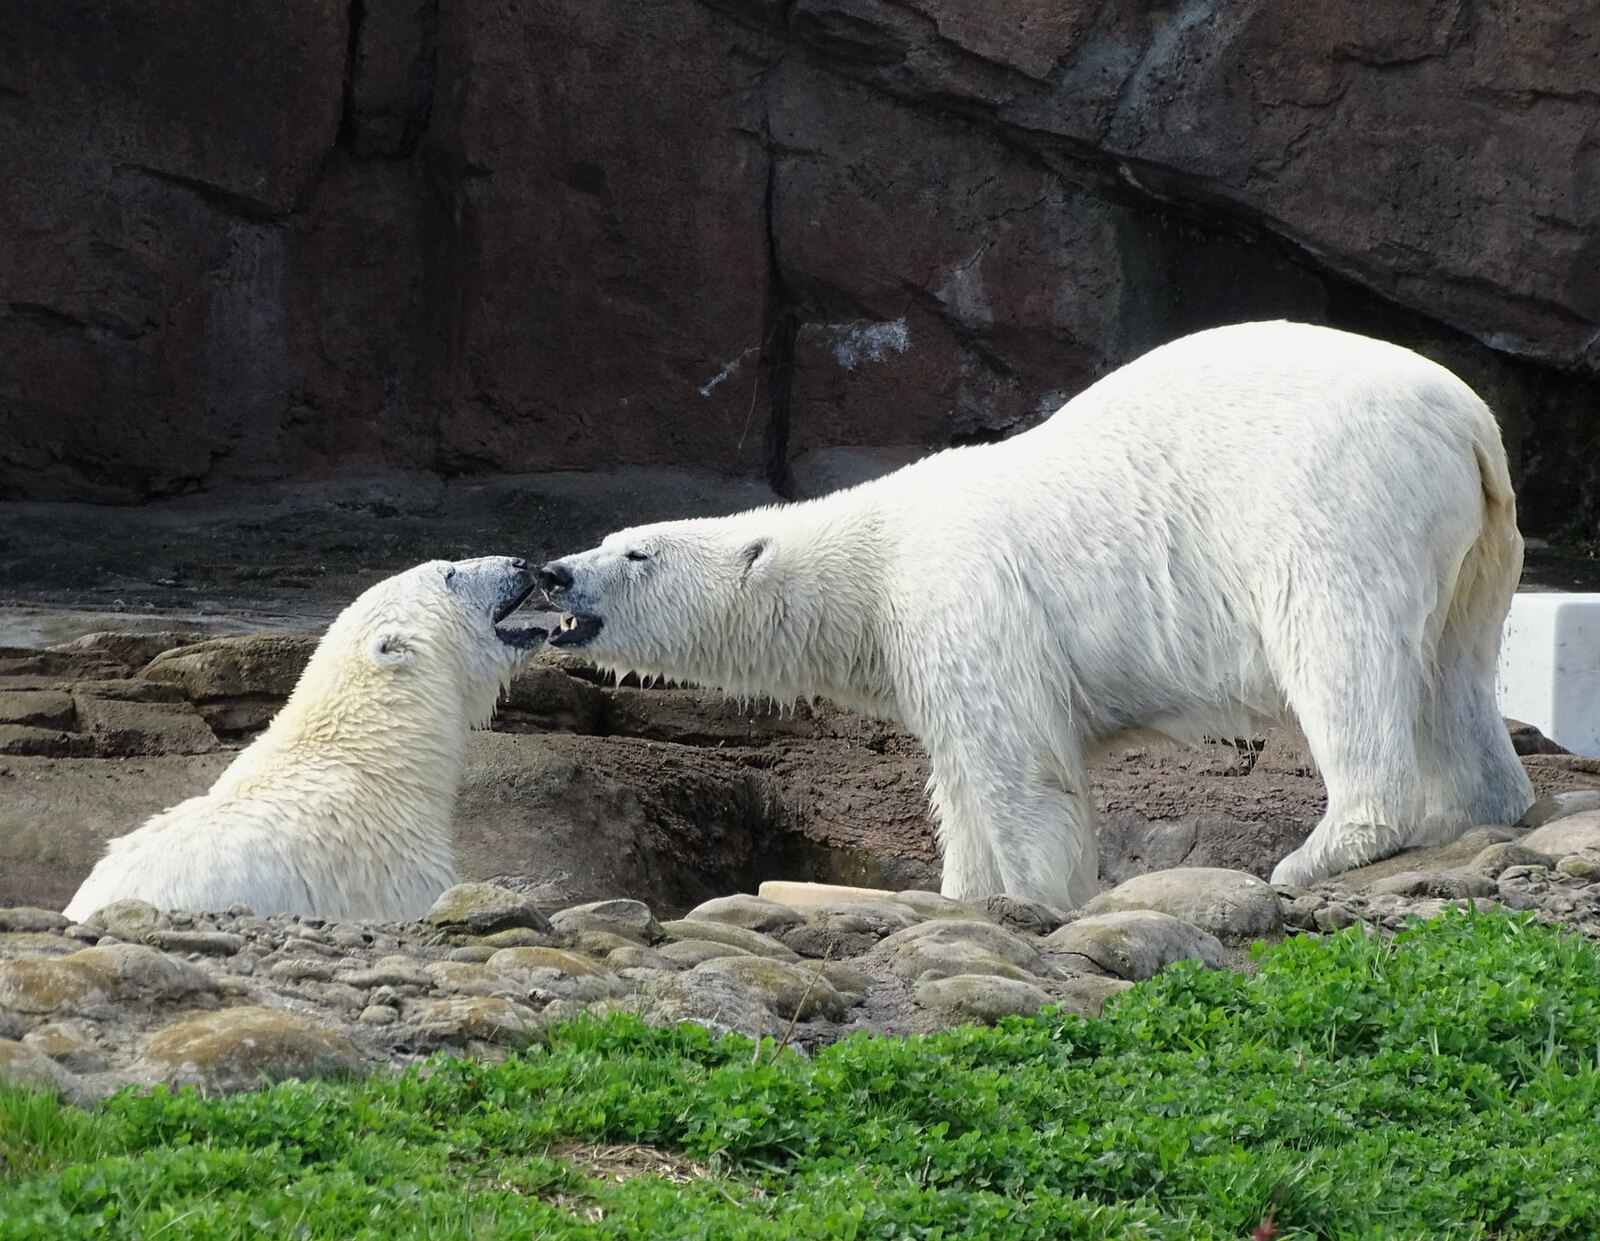 Point Defiance Zoo Welcoming New Polar Bears in Spring 2023